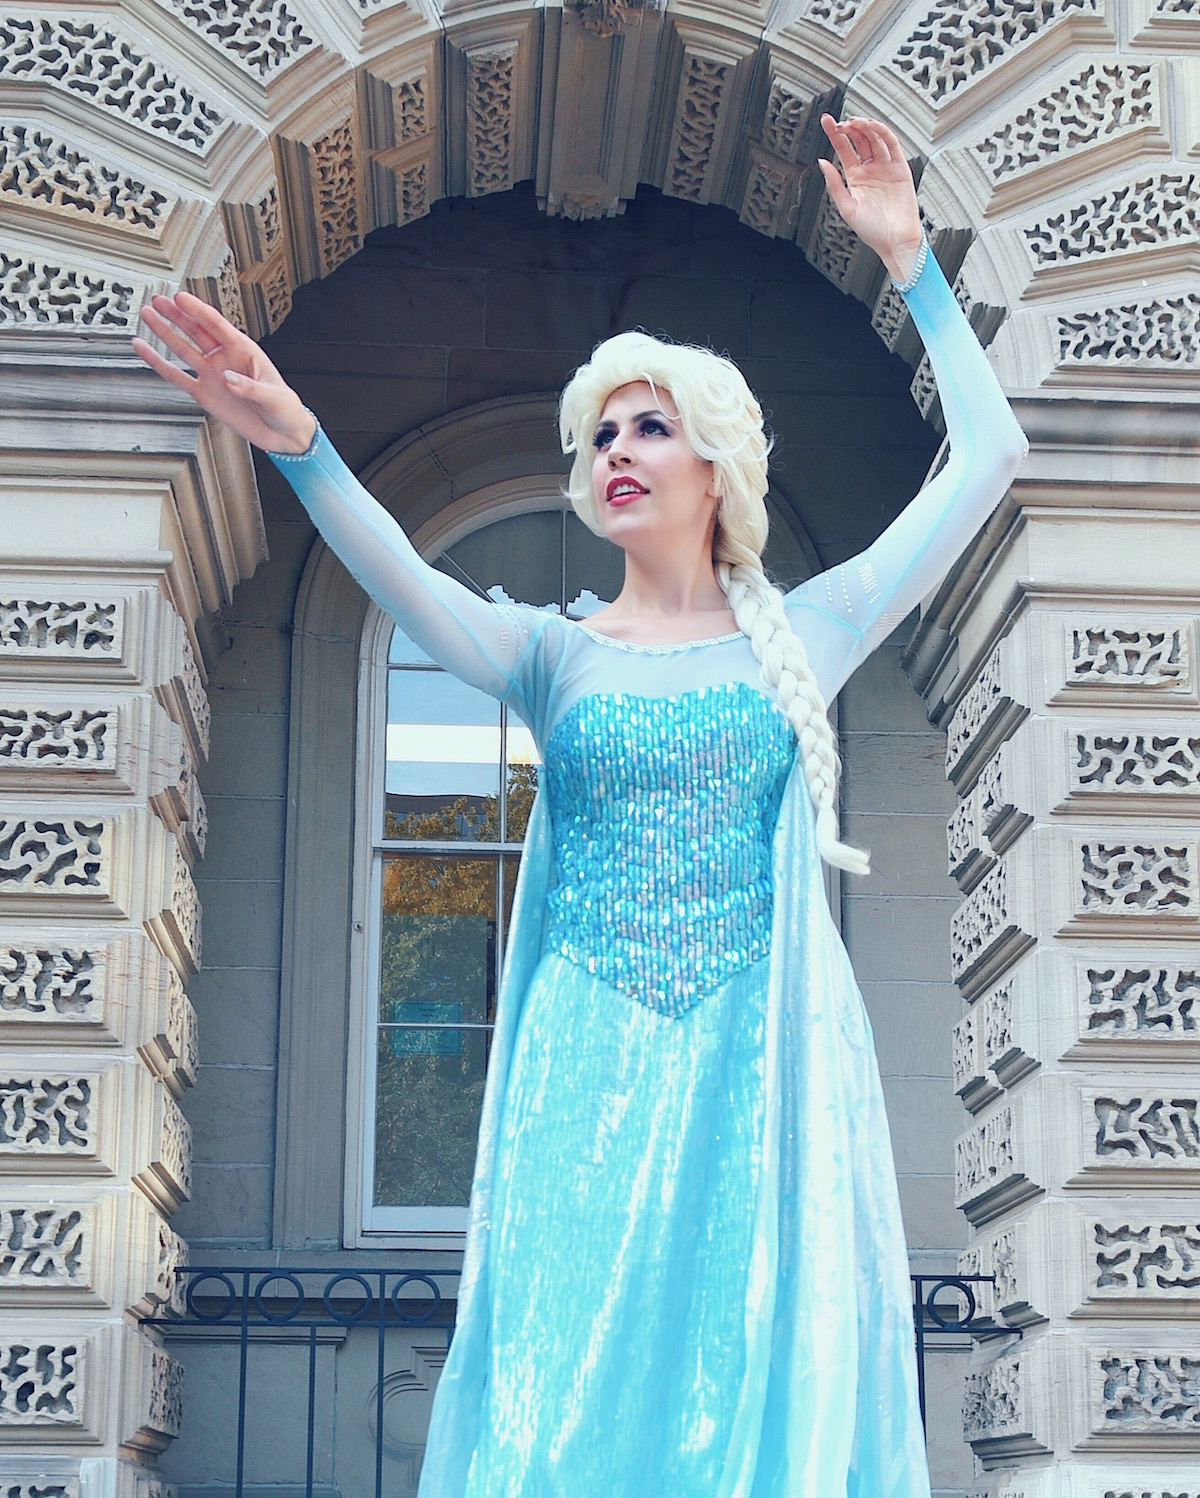 Elsa has her hands raised and looking toward the Frozen flurry she's about to create